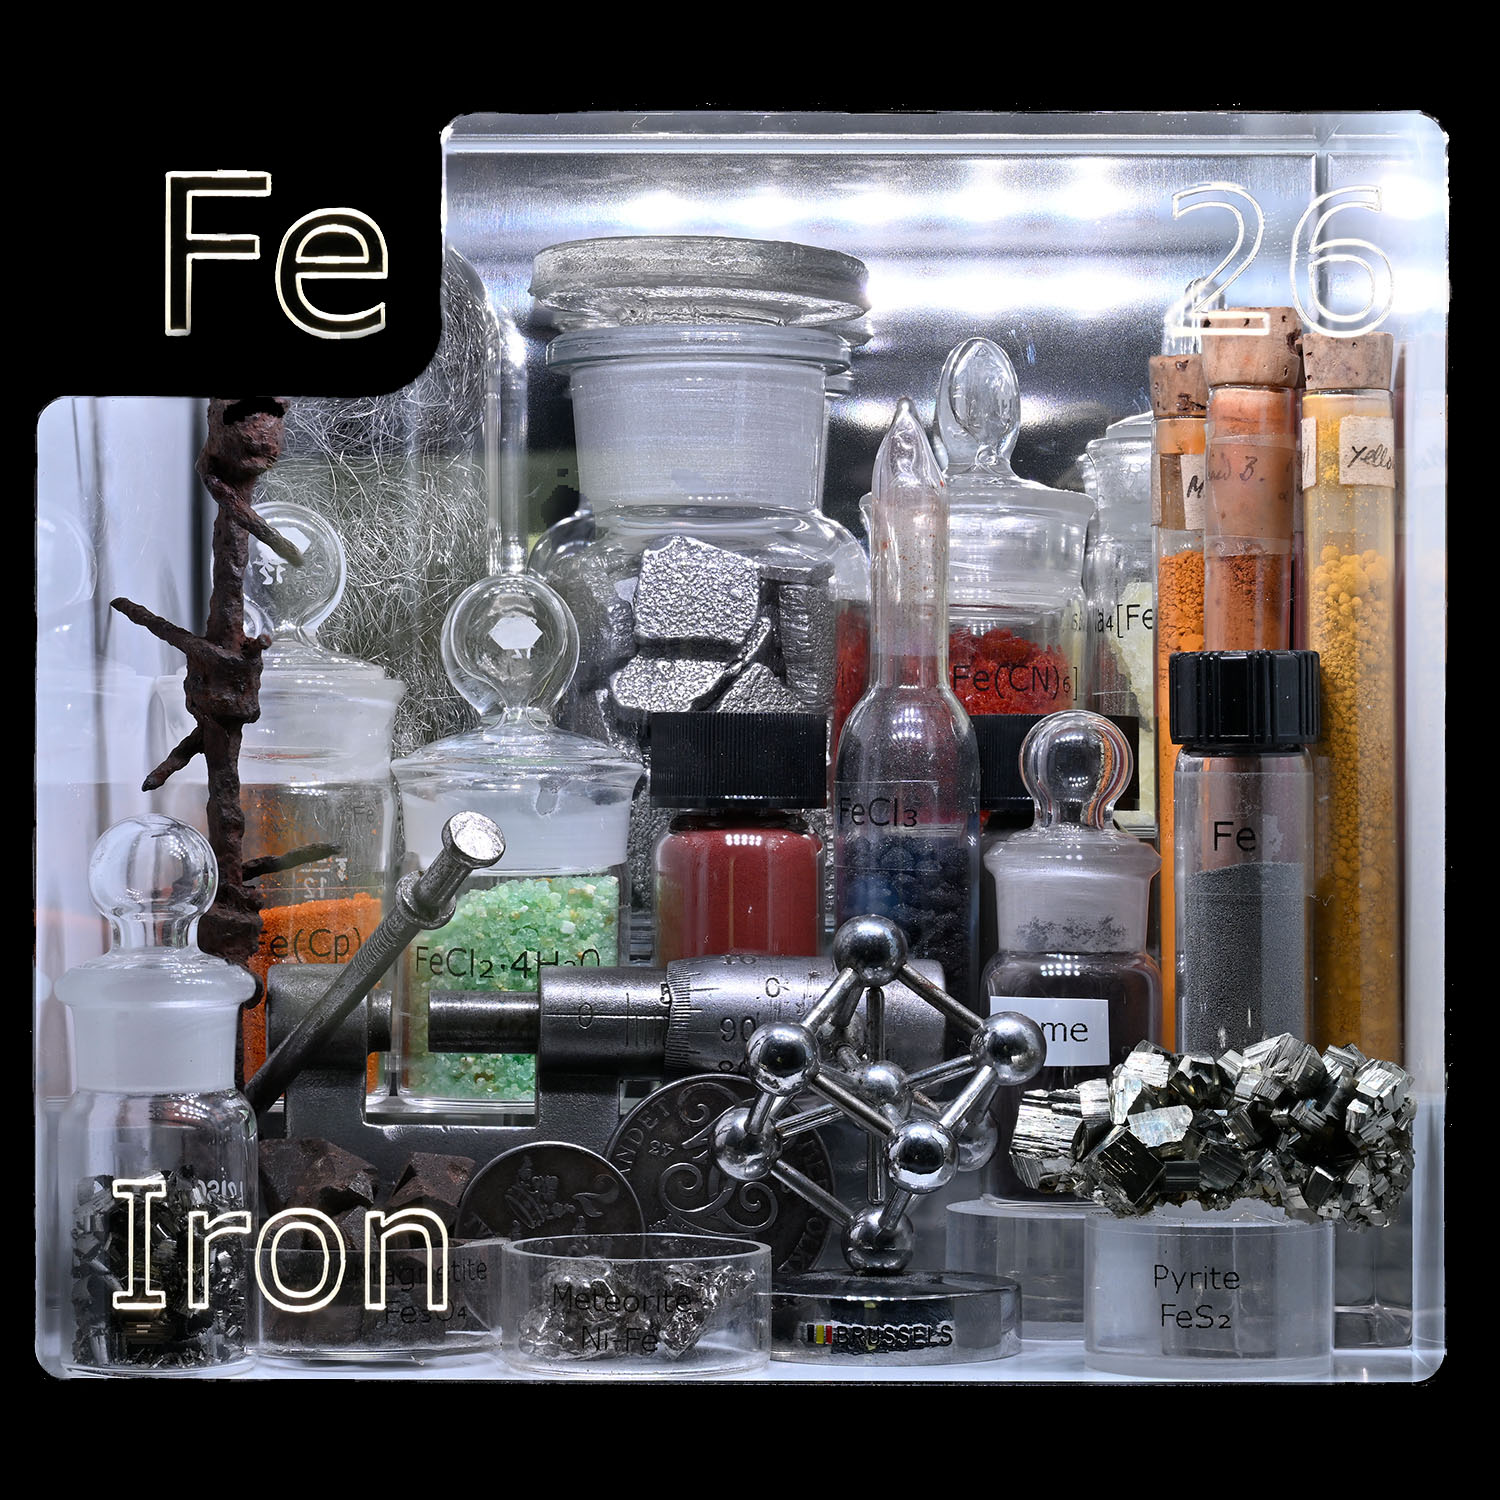 Periodic Table Display - close up of Iron and the items that contain that element